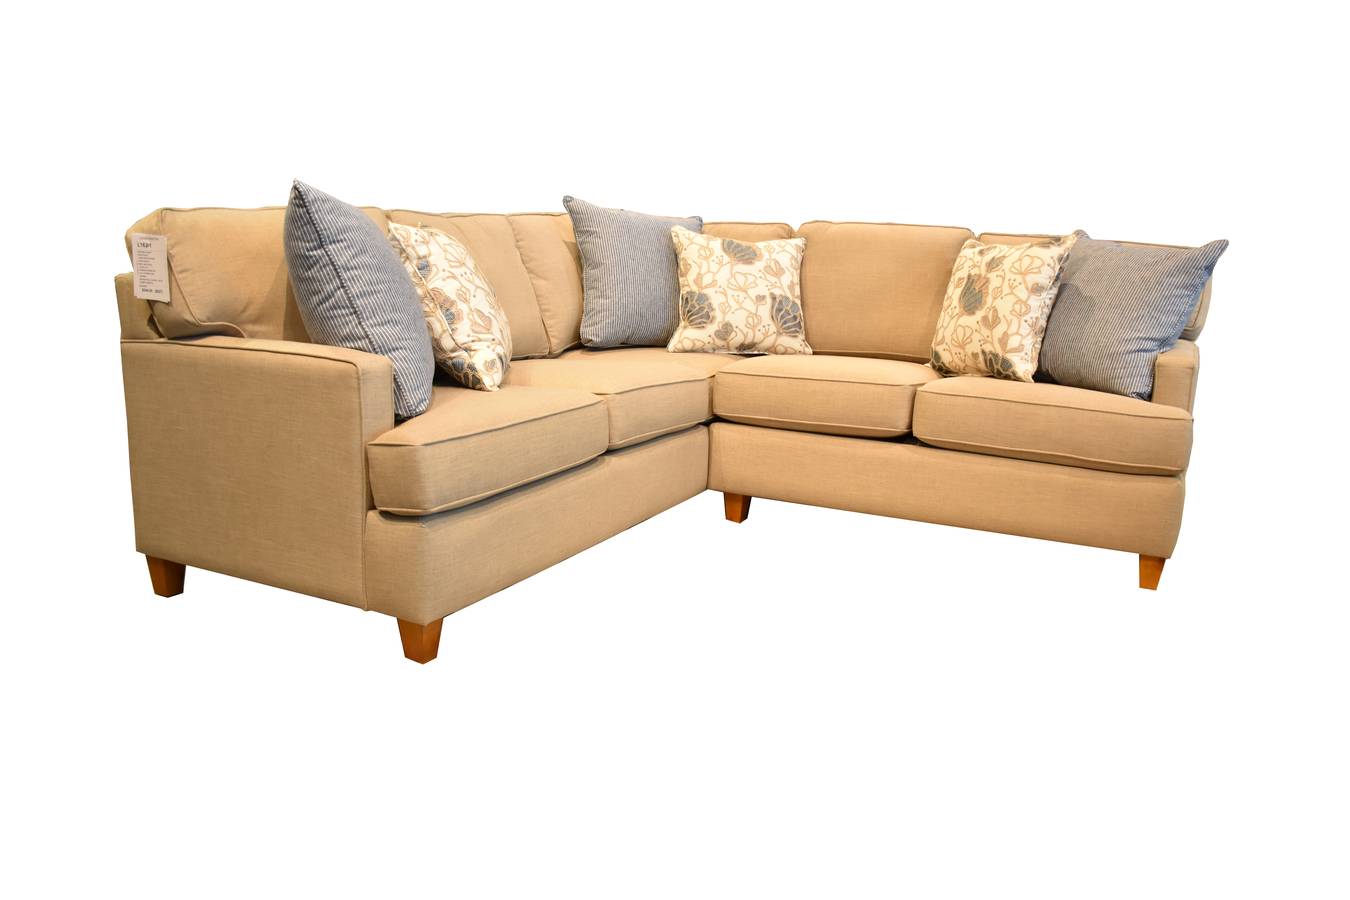 Sect162 Upholstered Sectional Sofa 2 Pc